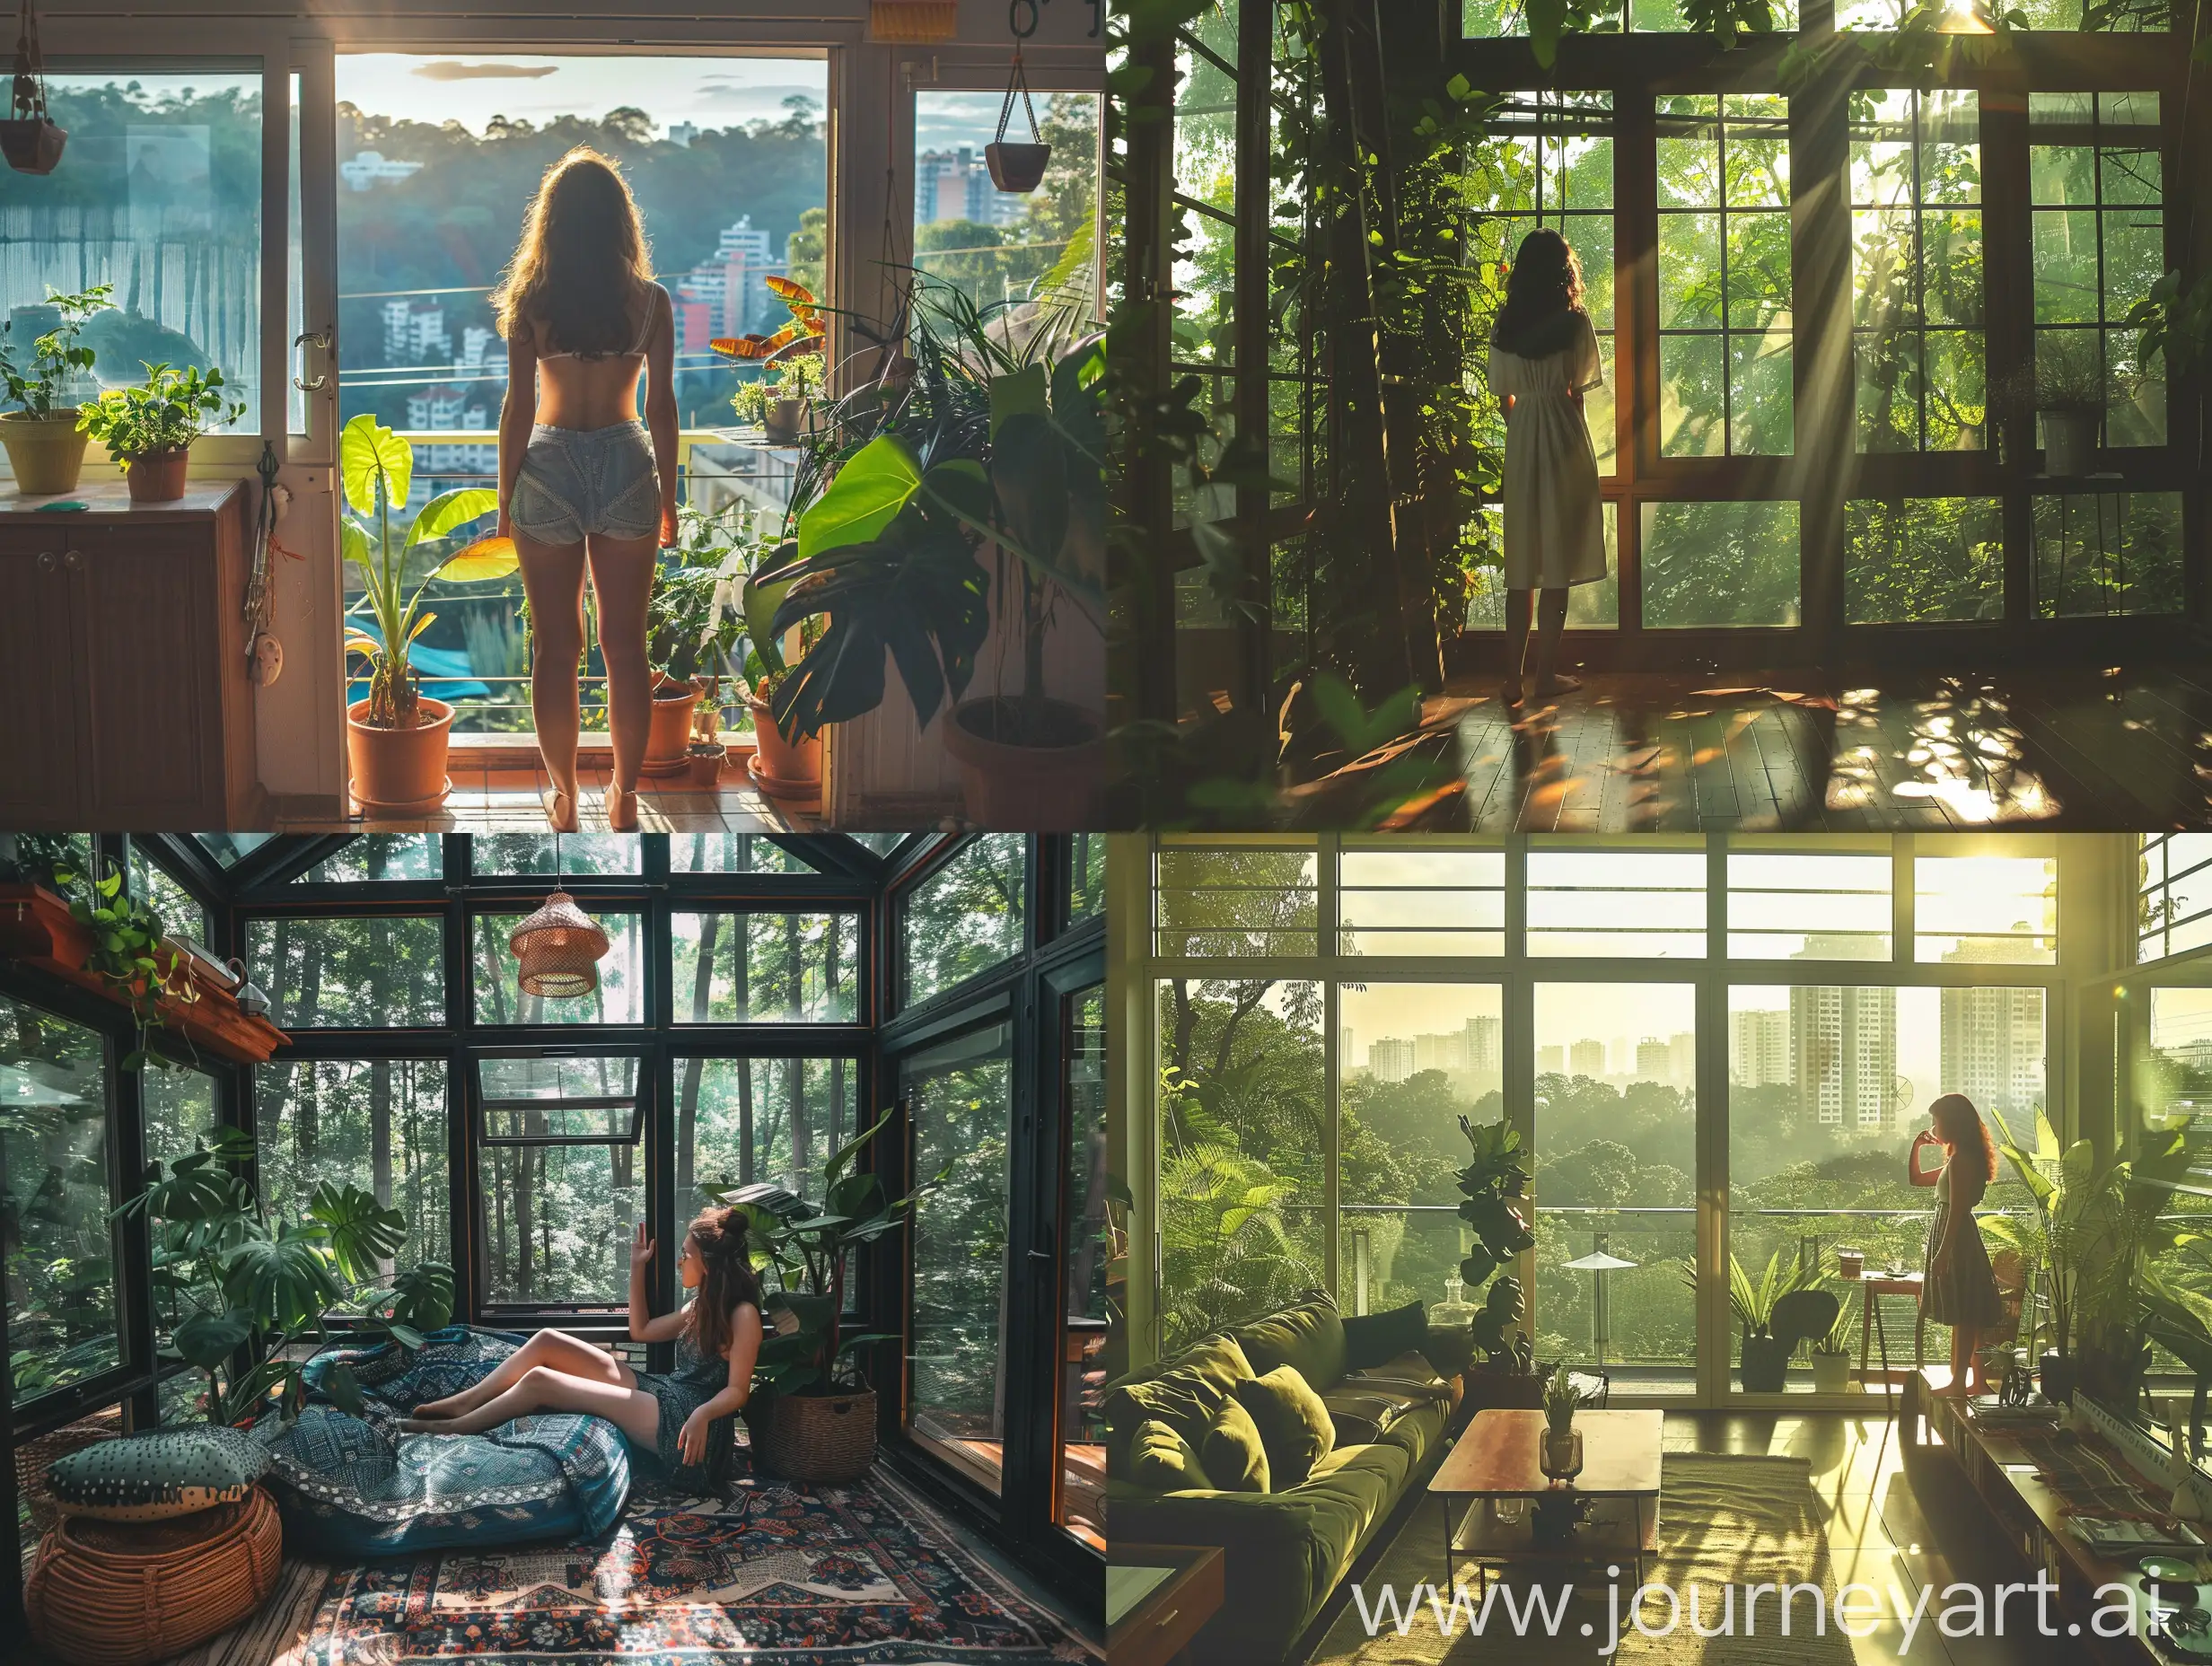 Urban-Sunroom-Overlooking-Forest-Serene-Cityscape-with-Girl